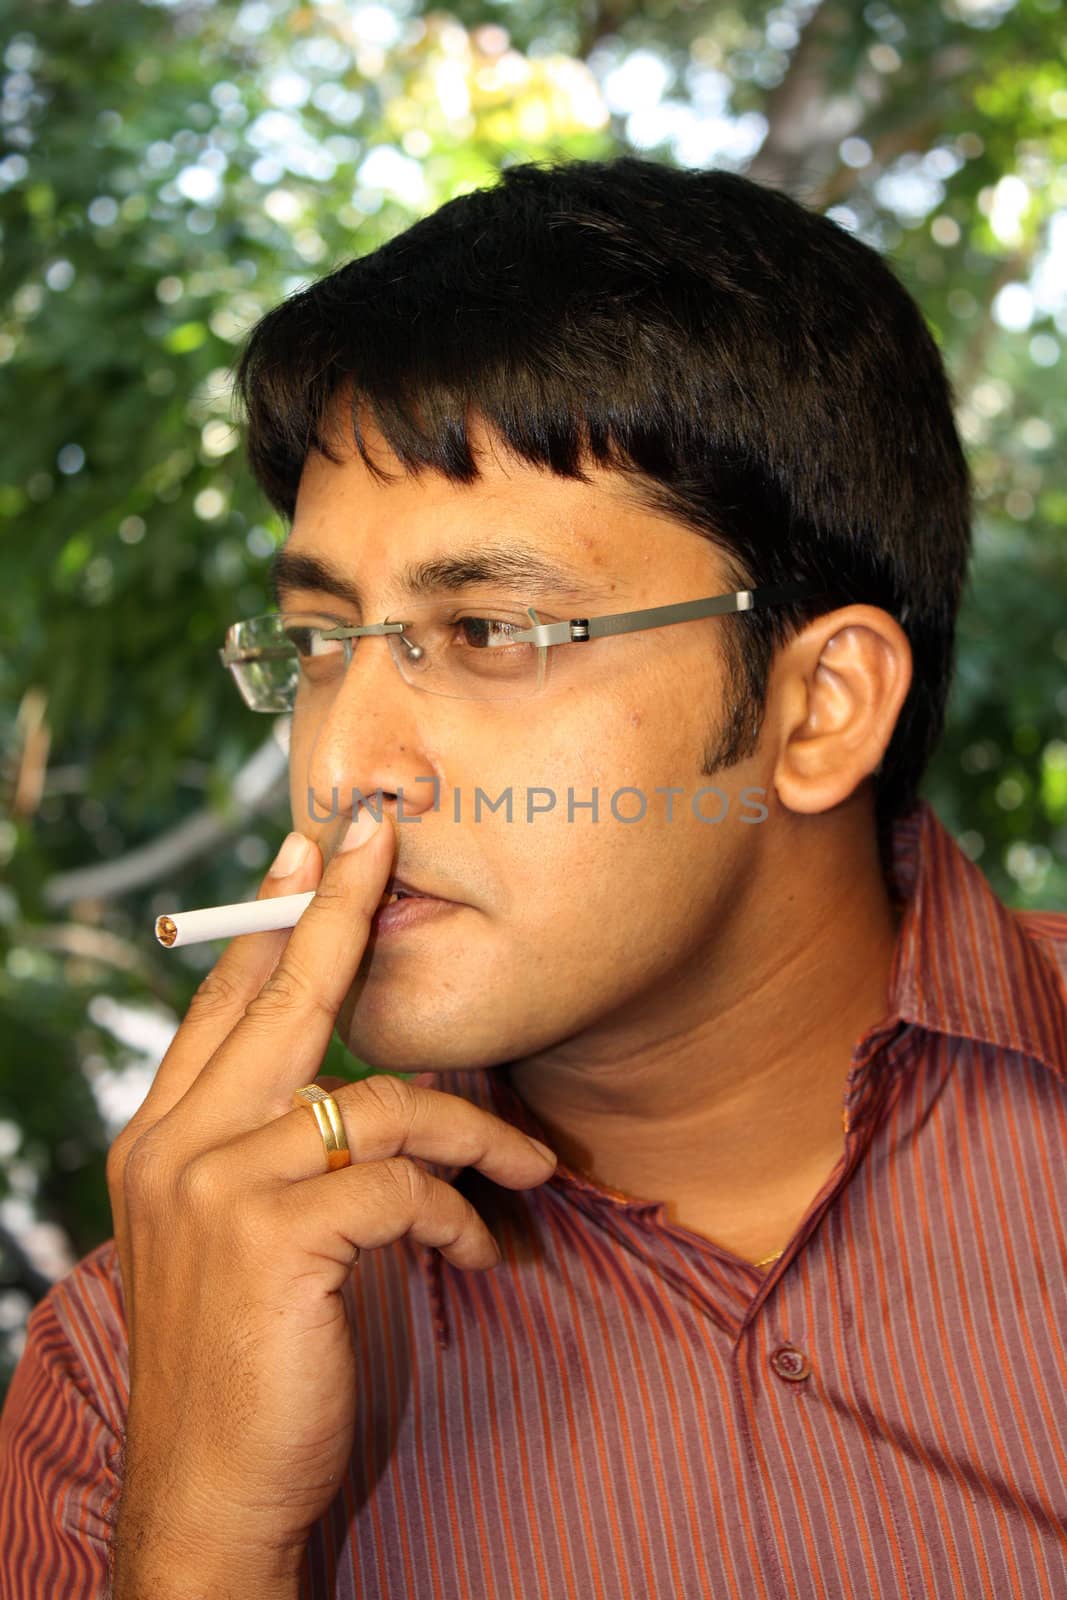 A portrait of a smoking Indian man.